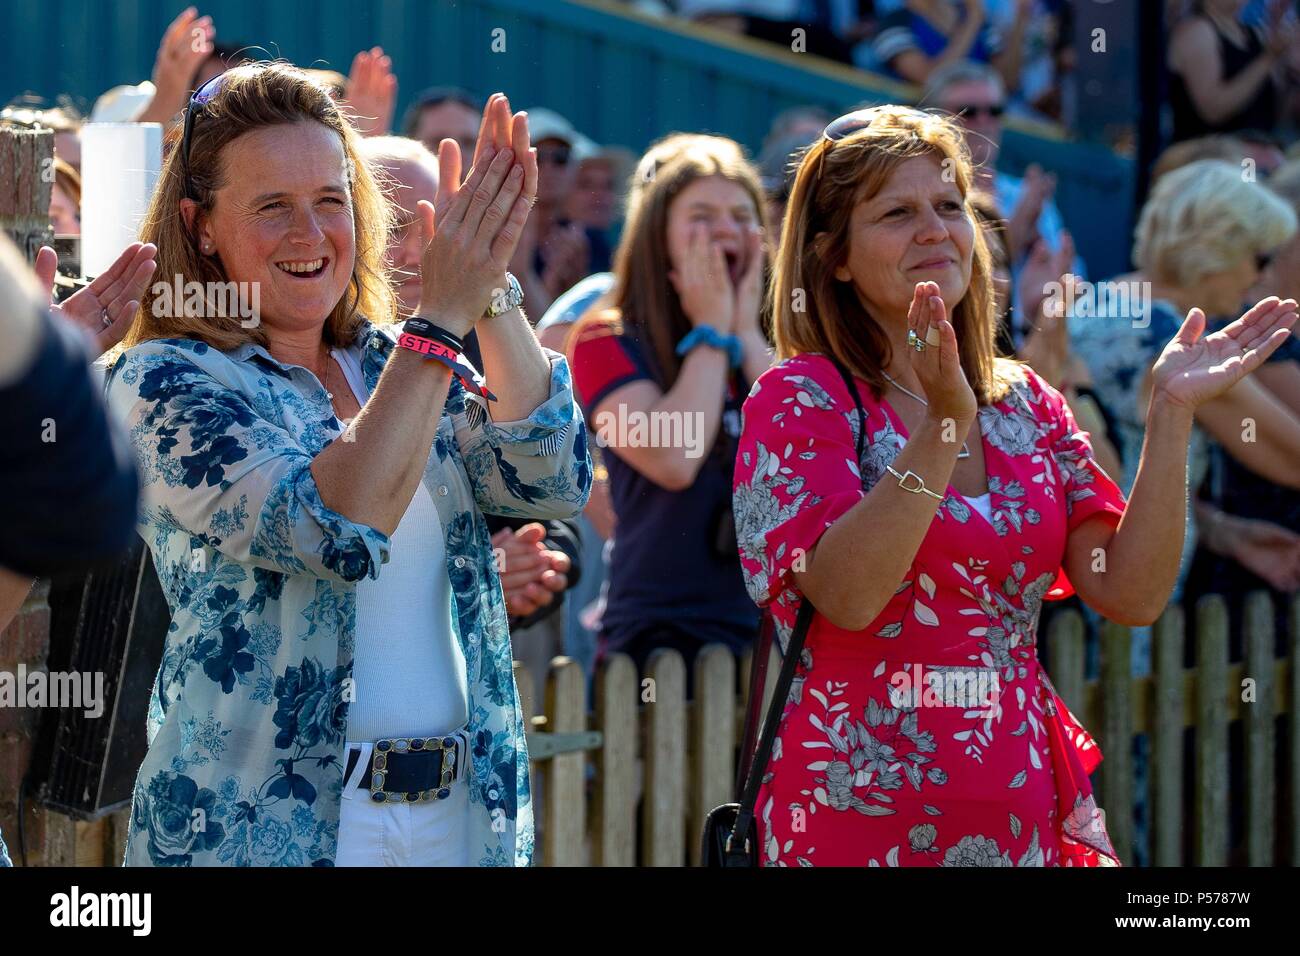 West Sussex, UK. 24th Jun, 2018. Pippa Funnell smiling and clapping.The Al Shira'aa Derby. The Al Shira'aa Hickstead Derby Meeting. Showjumping. The All England Jumping Course. Hickstead. West Sussex. UK. Day 5. 24/06/2018. Credit: Sport In Pictures/Alamy Live News Stock Photo